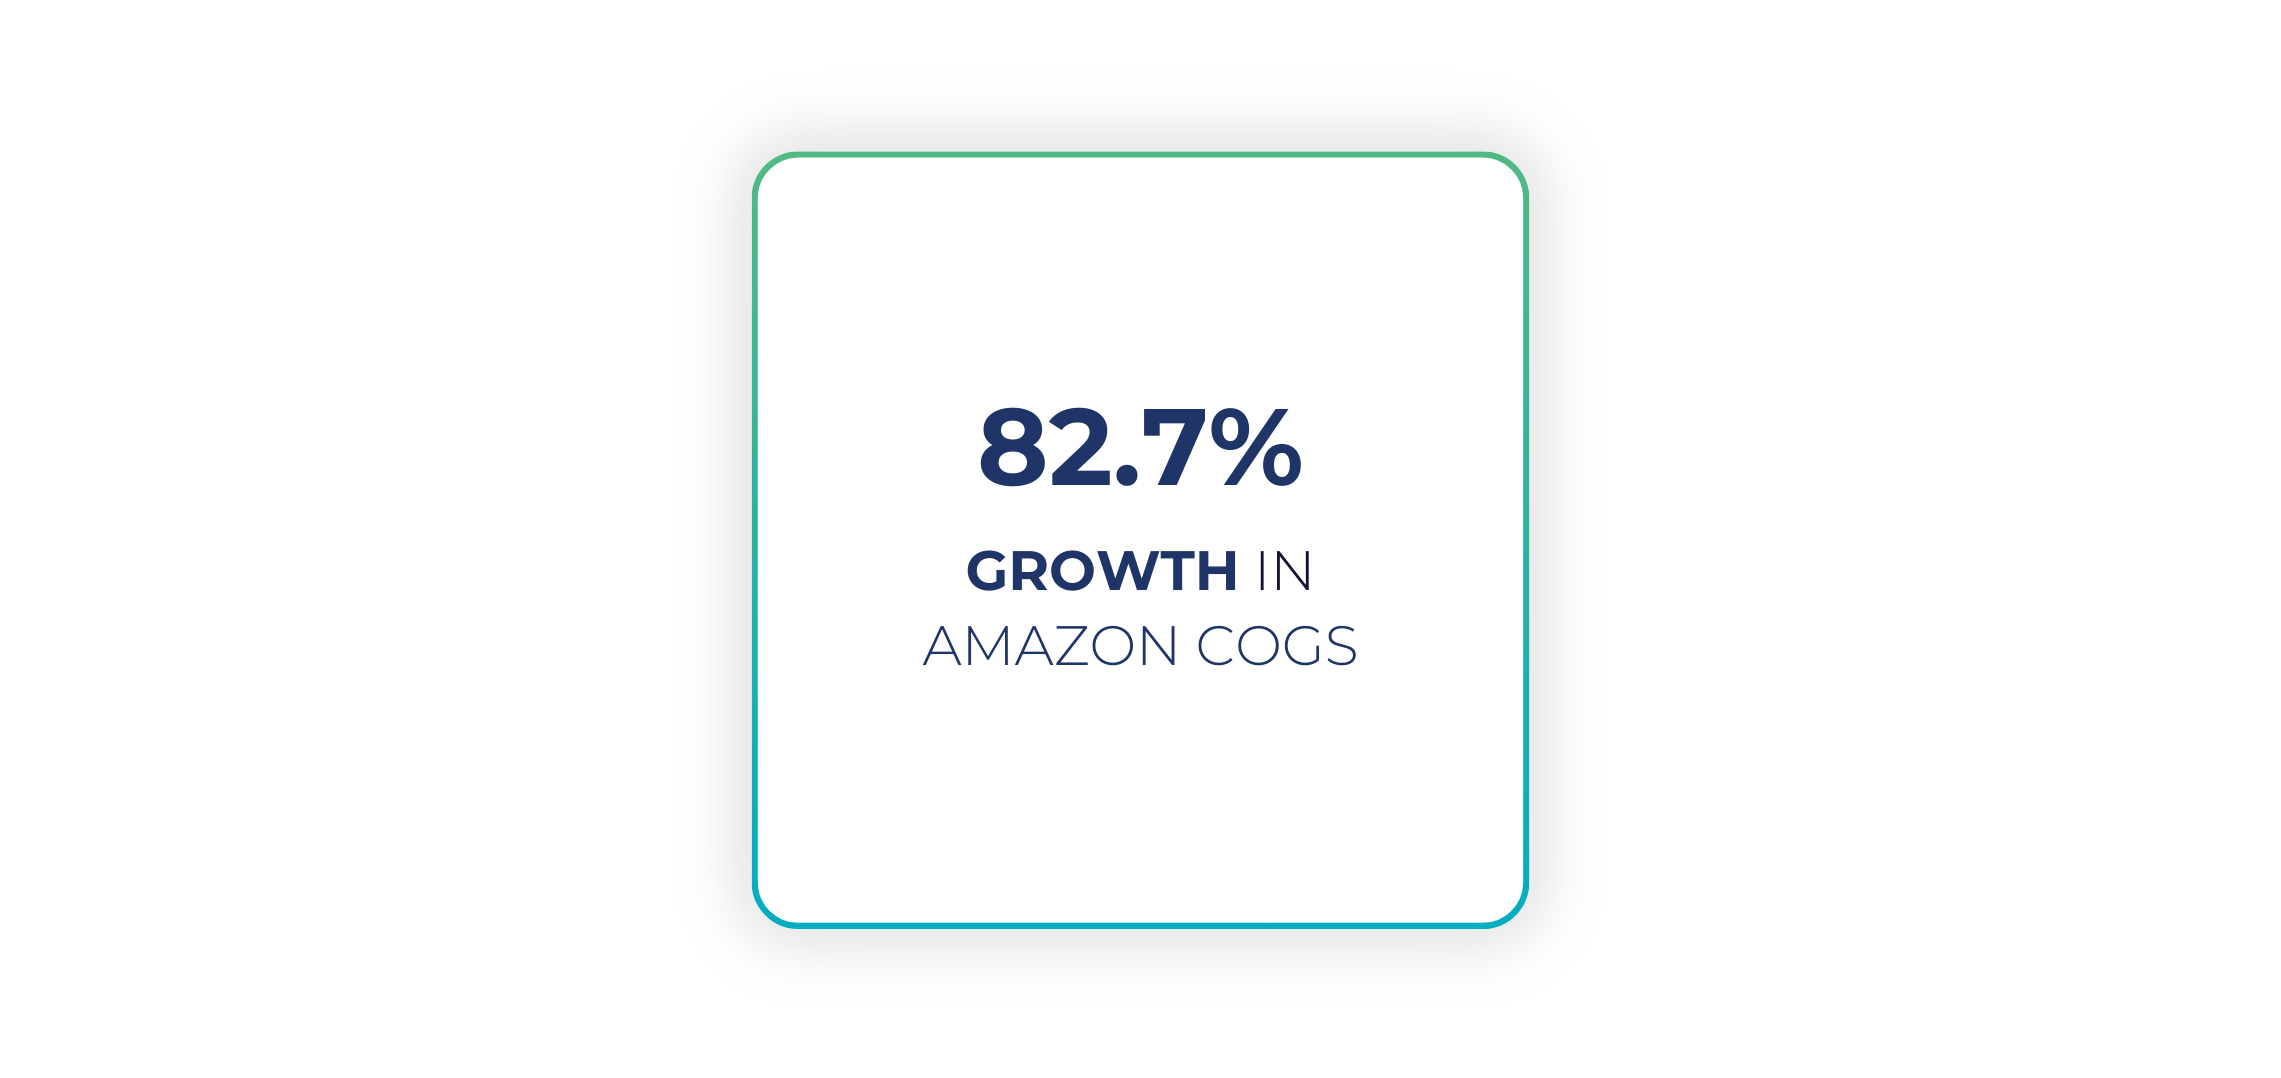 KitchenSupply: 82.7% growth in Amazon COGS